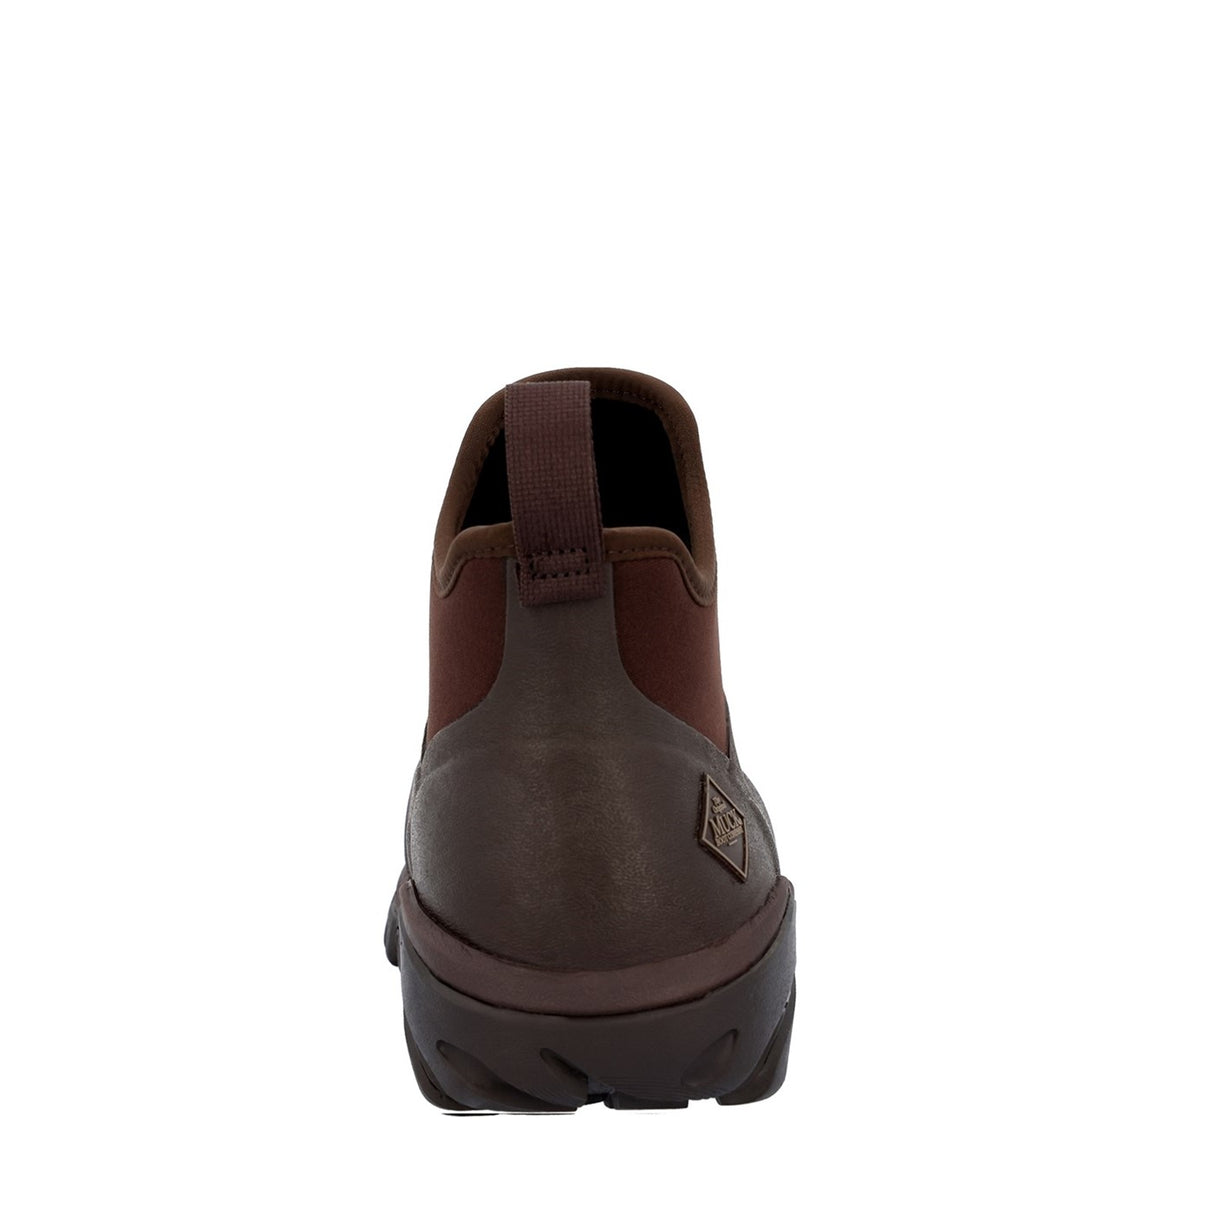 Men's Woody Sport Ankle Boots Brown